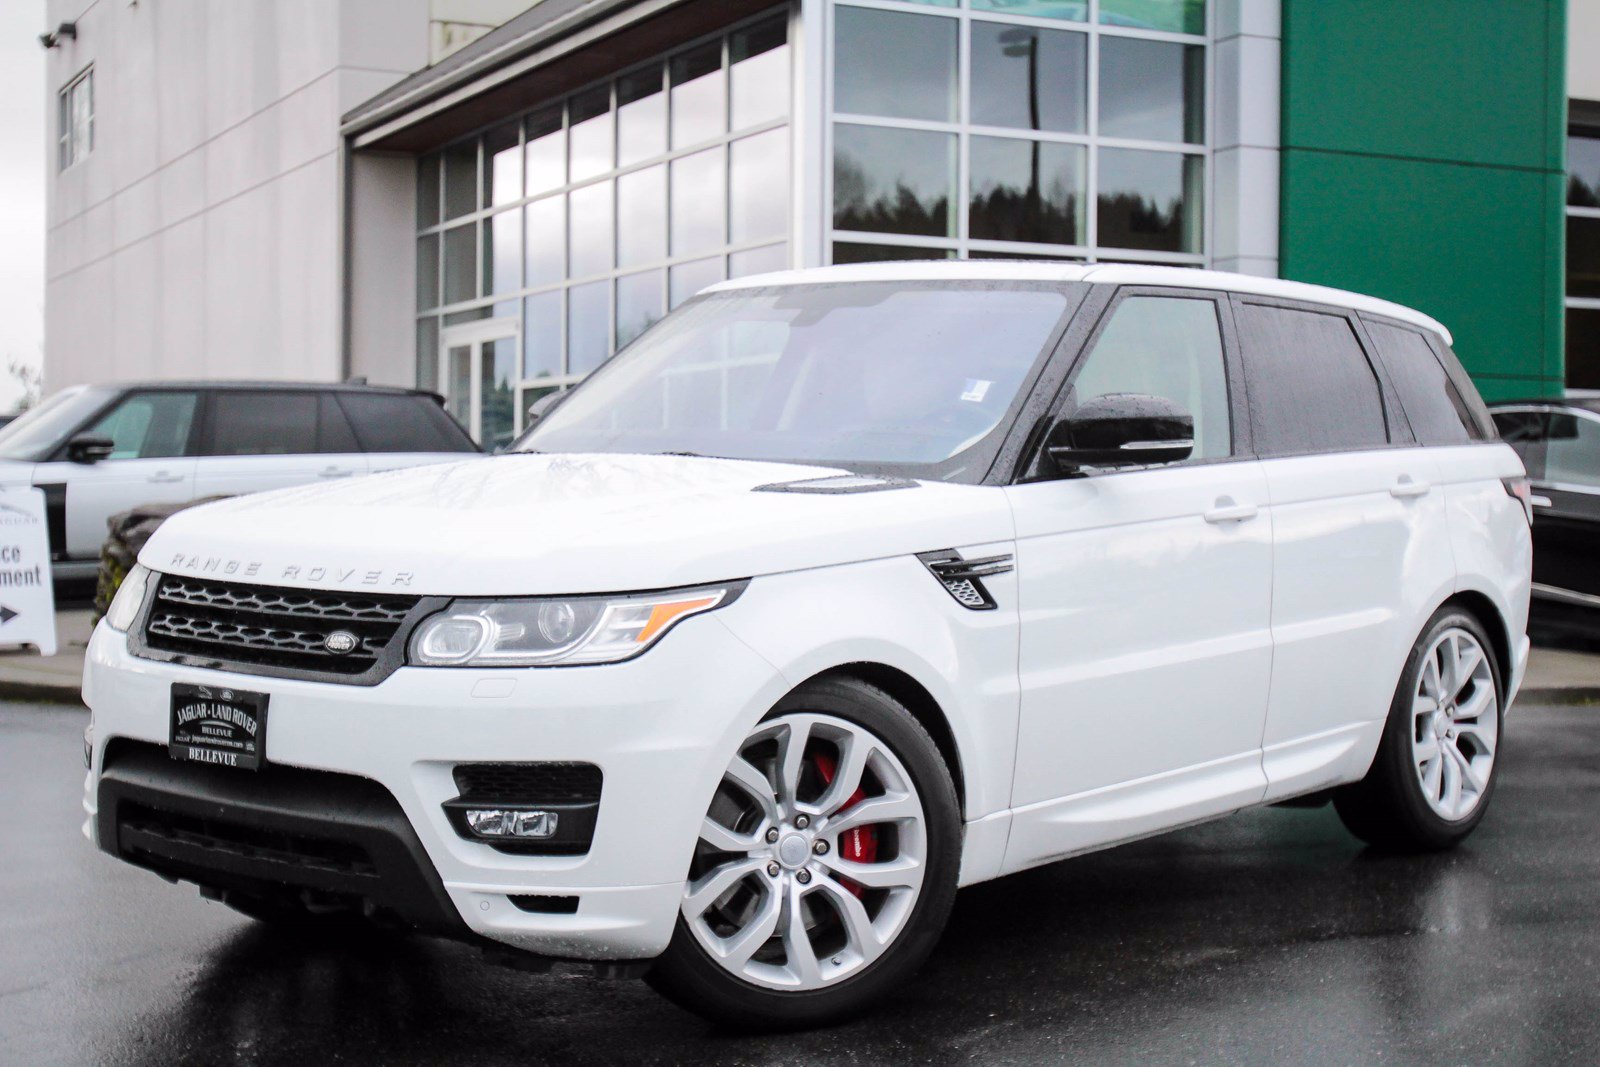 2016 Range Rover Autobiography For Sale  : The Sales And Service Are Both Remarkable And I Will Only Deal With These.